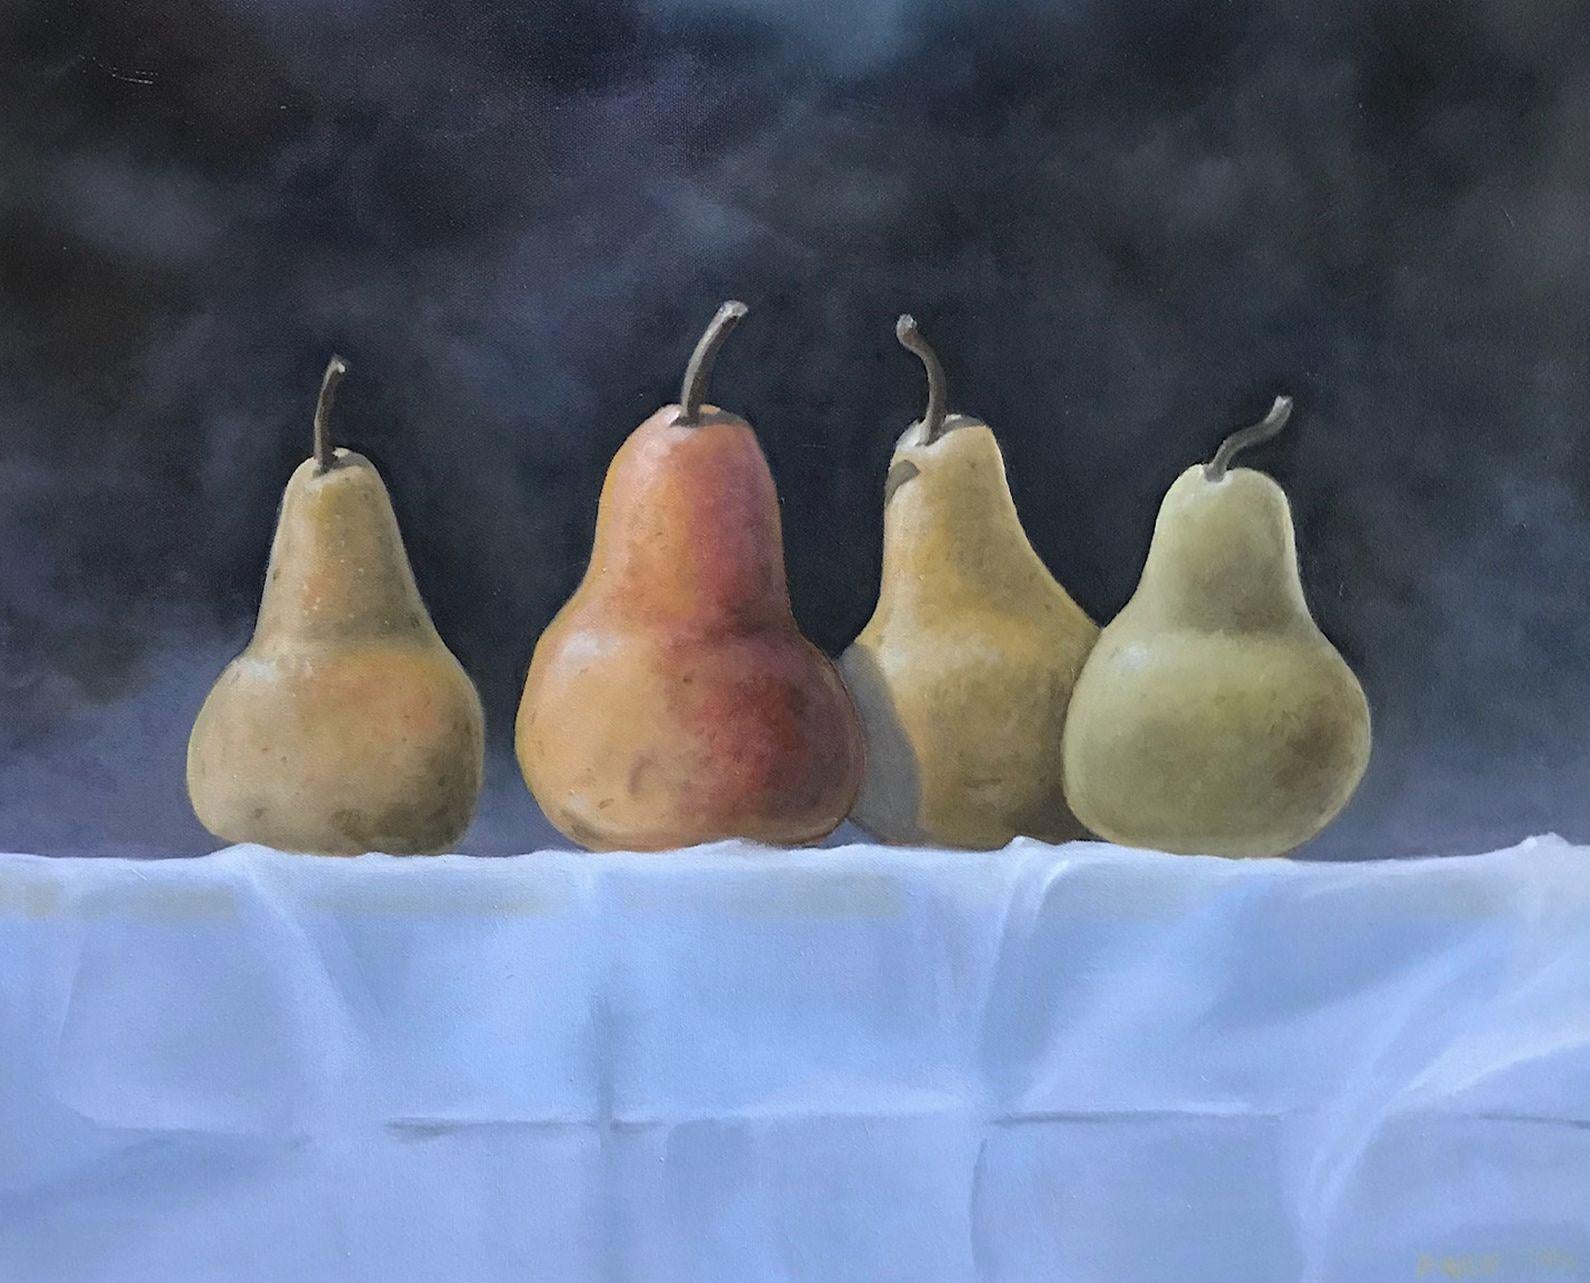 Simple yet dramatic setting of four pears against a dark, ominous sky. The darkness is offset by a bright, light linen tablecloth. These elements help to frame the lush colors of the fruit. :: Painting :: Realism :: This piece comes with an official